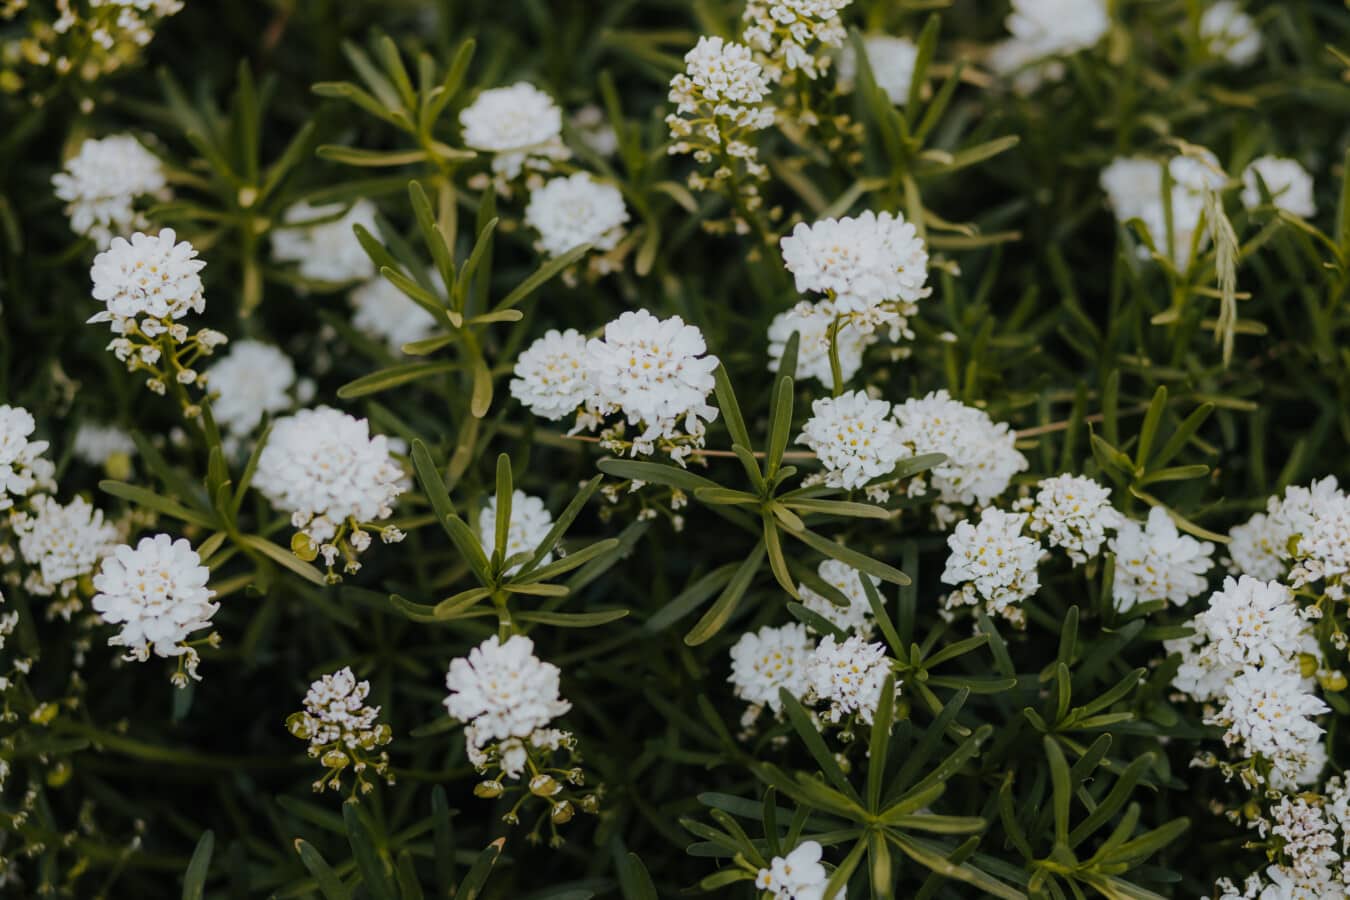 white flower, small white, grass plants, leaf, plant, flower, nature, spring, herb, flowers